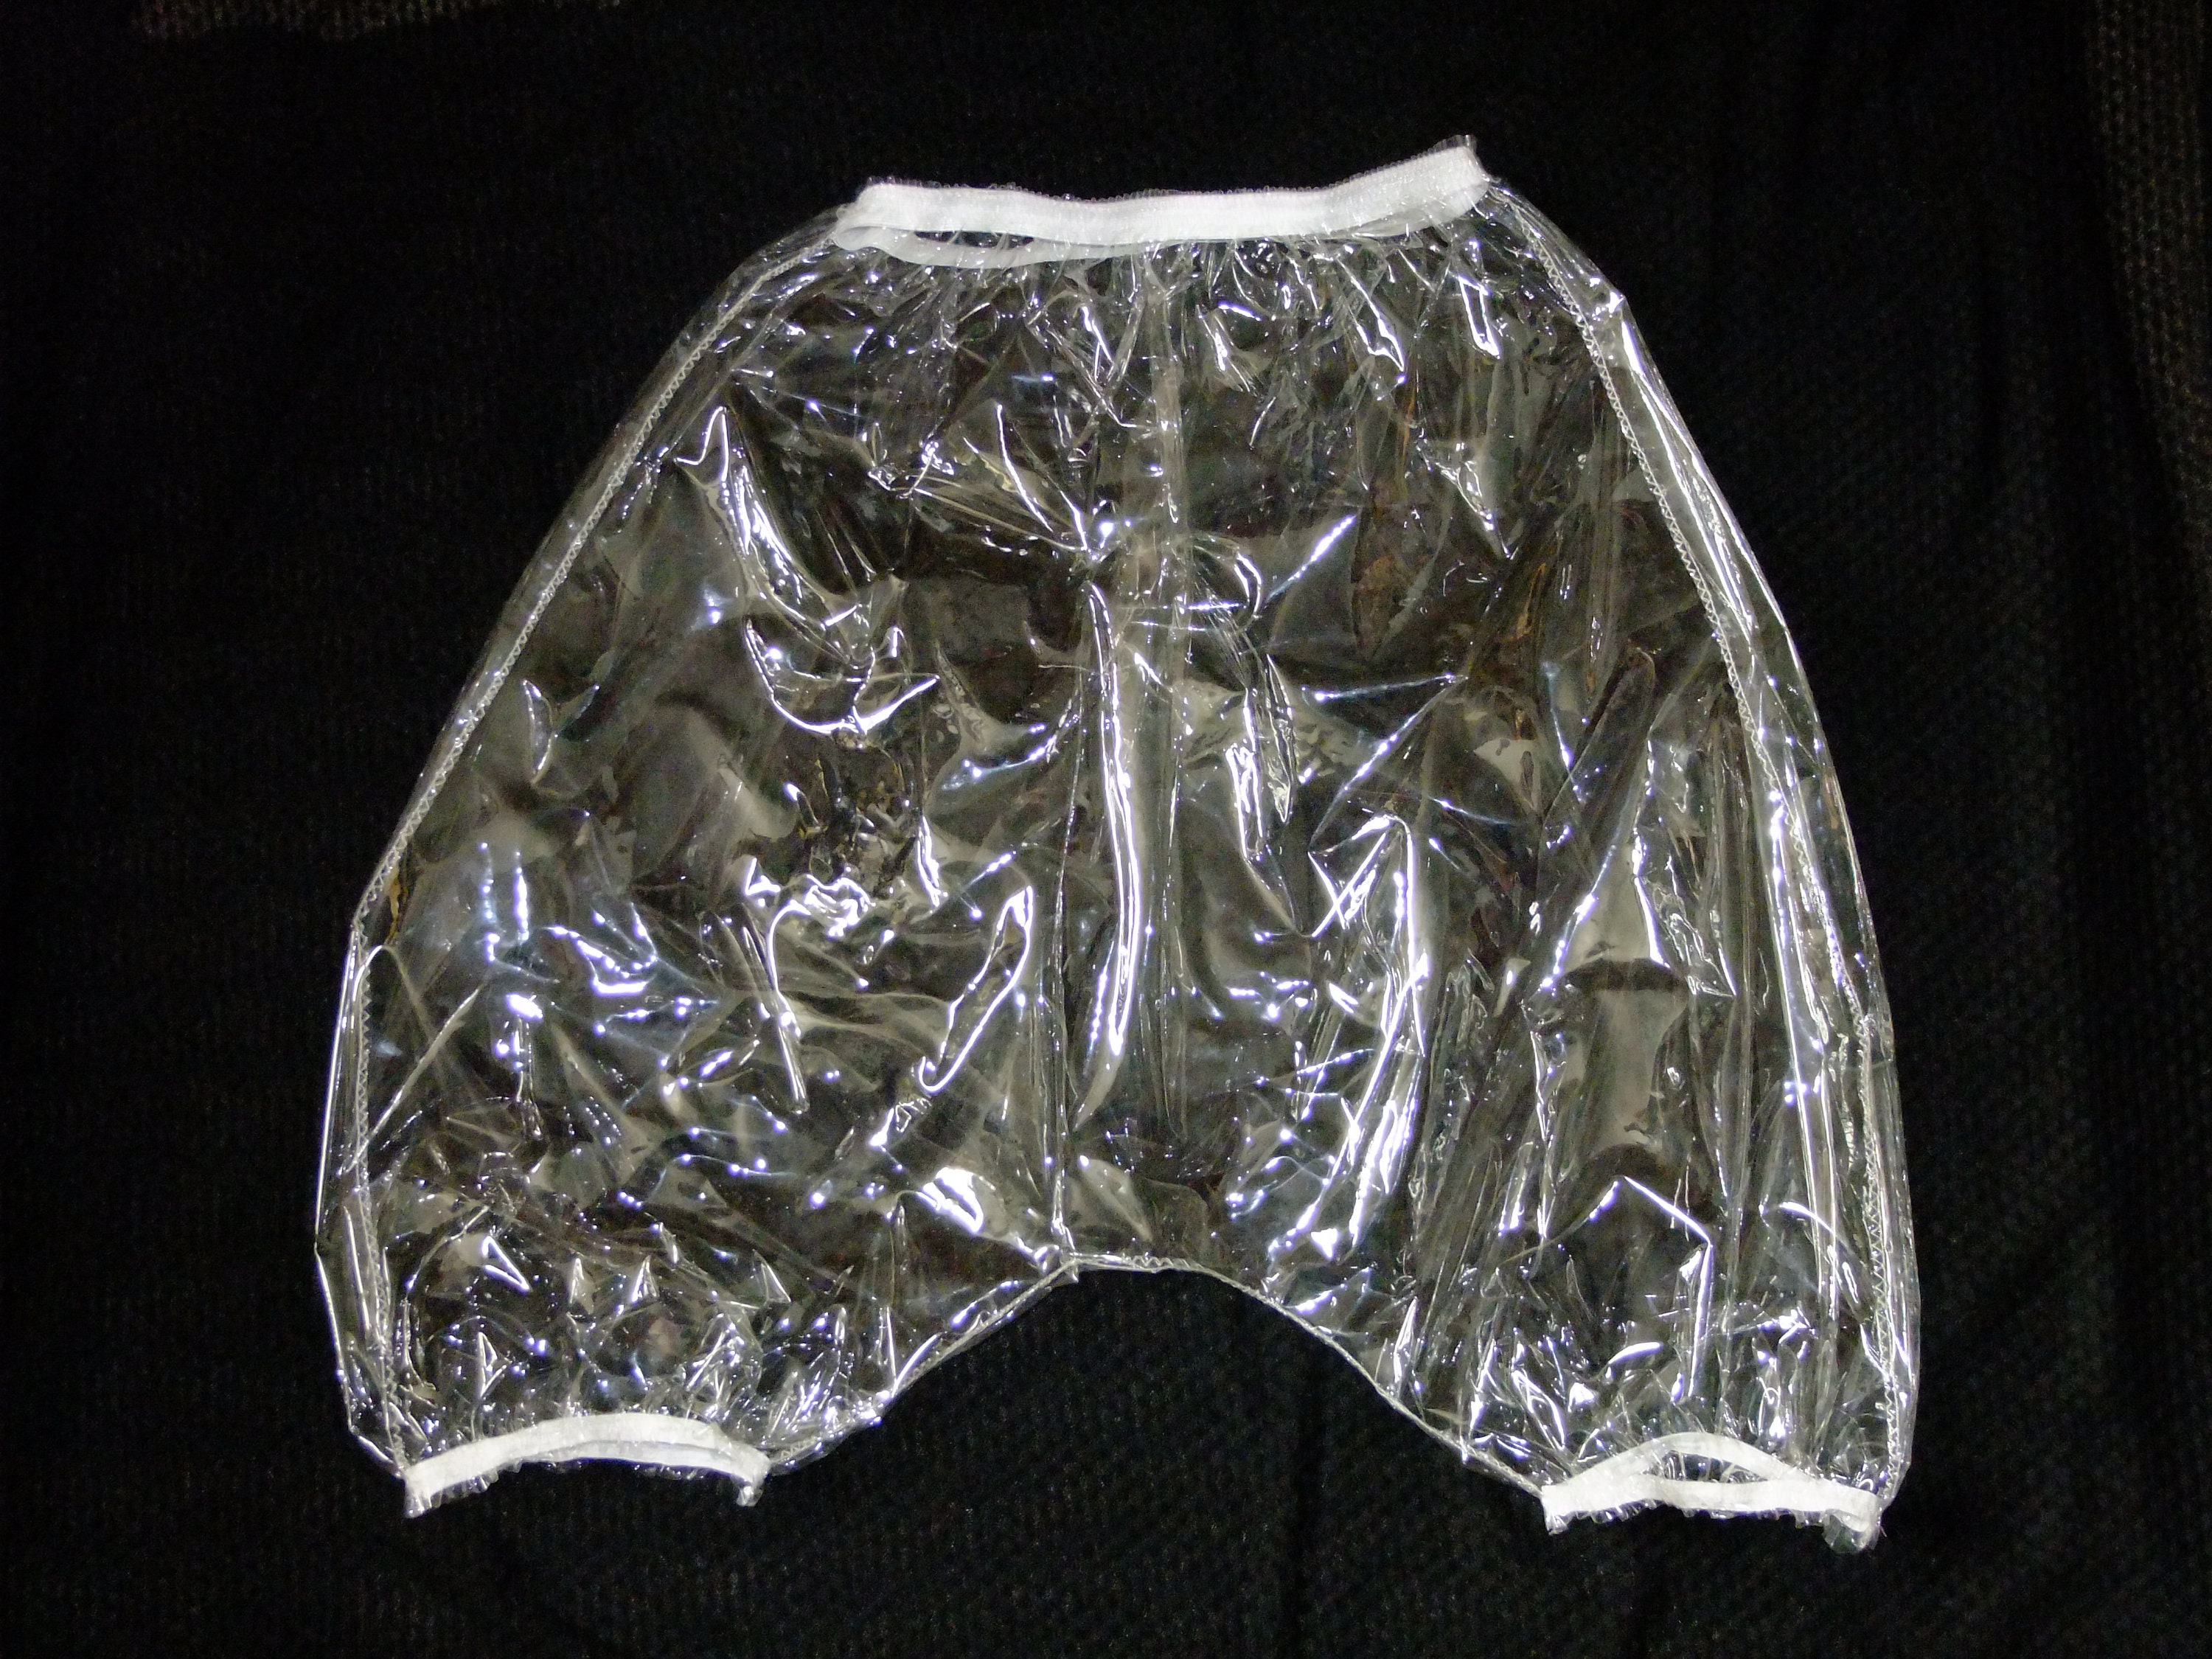 Clear PVC Directoire Knickers Bloomers See Through Plastic Panties Old  Style Baggy Underwear Full Vinyl Briefs Unisex Roleplay Sissy -  Canada